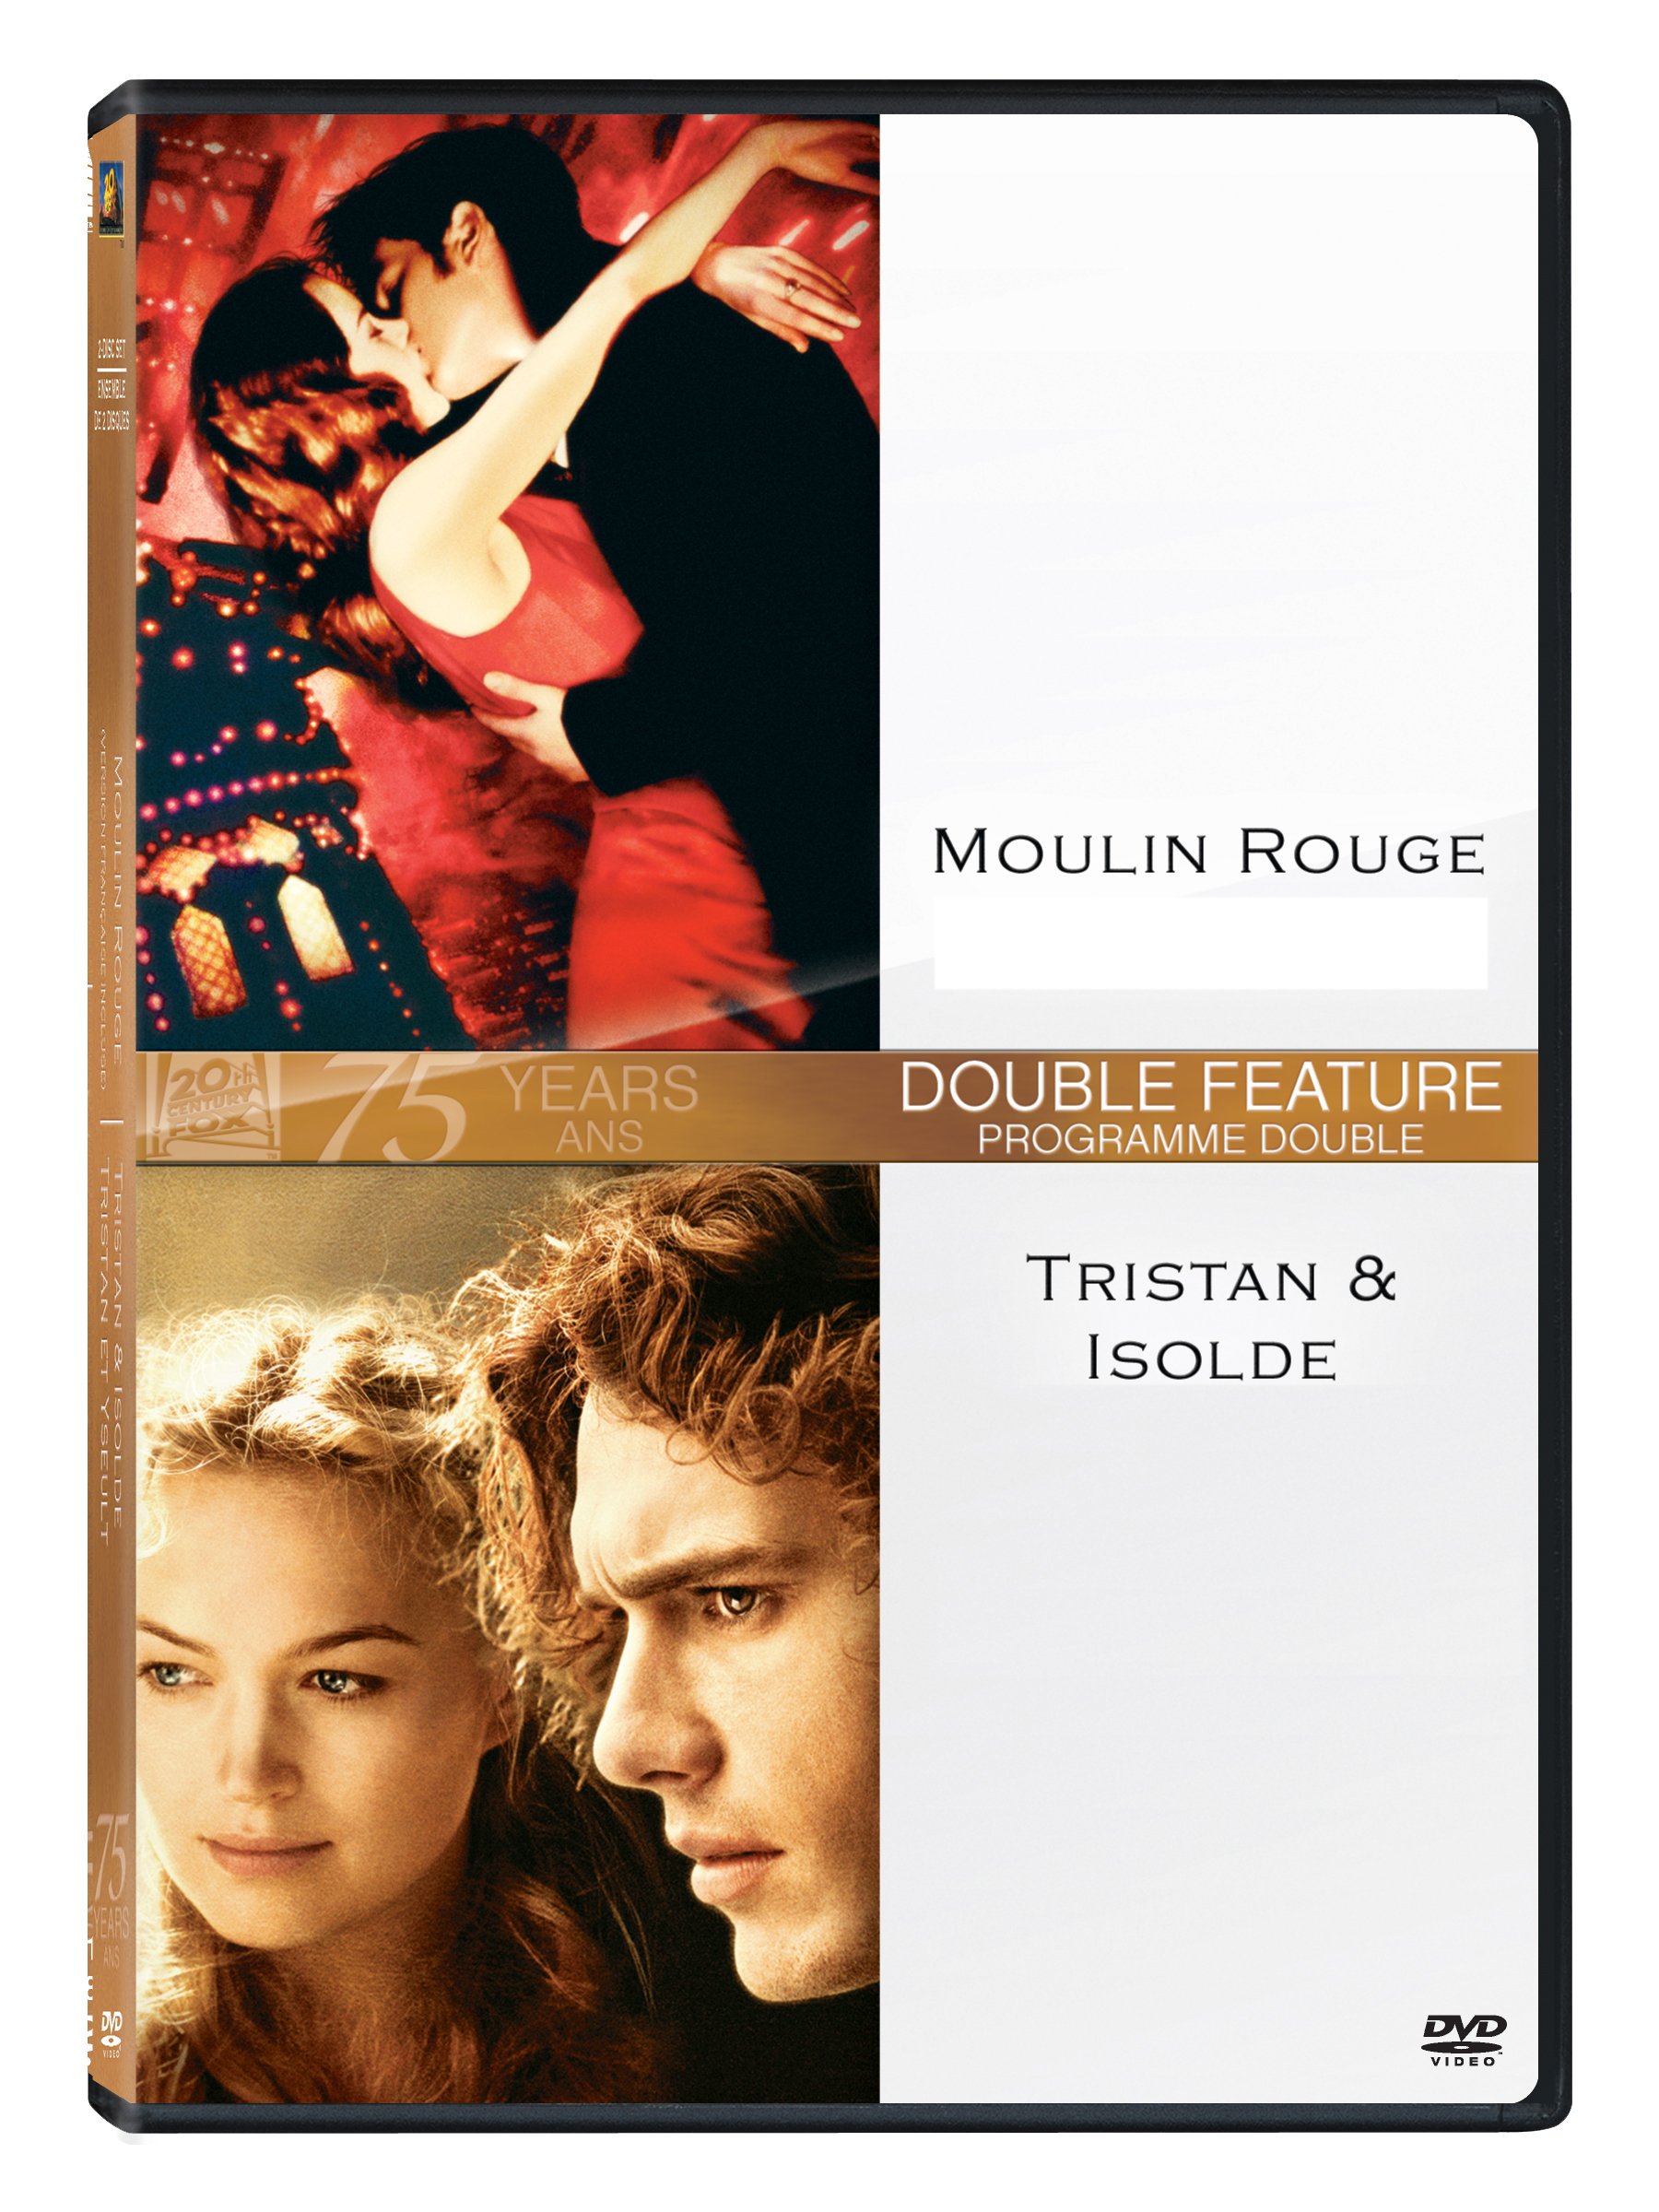 2-movies-collection-moulin-rouge-tristan-isolde-movie-purchase-or